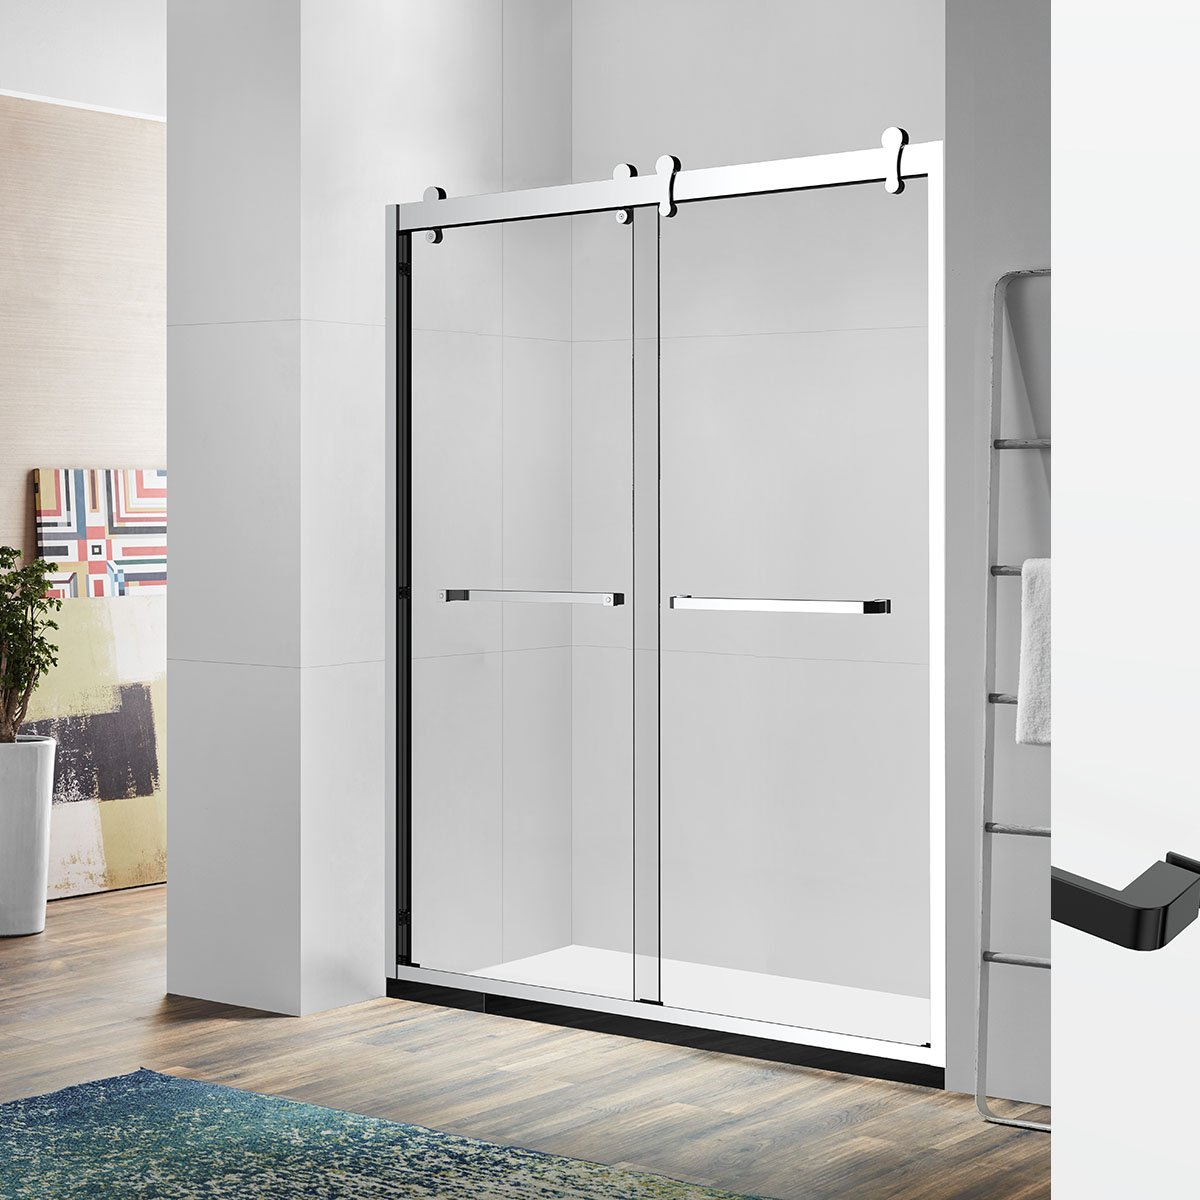 60" GBY22 Owen Bypass Series Shower Door with Klearteck Treatment (3/8" Thickness) (Brushed Nickel)